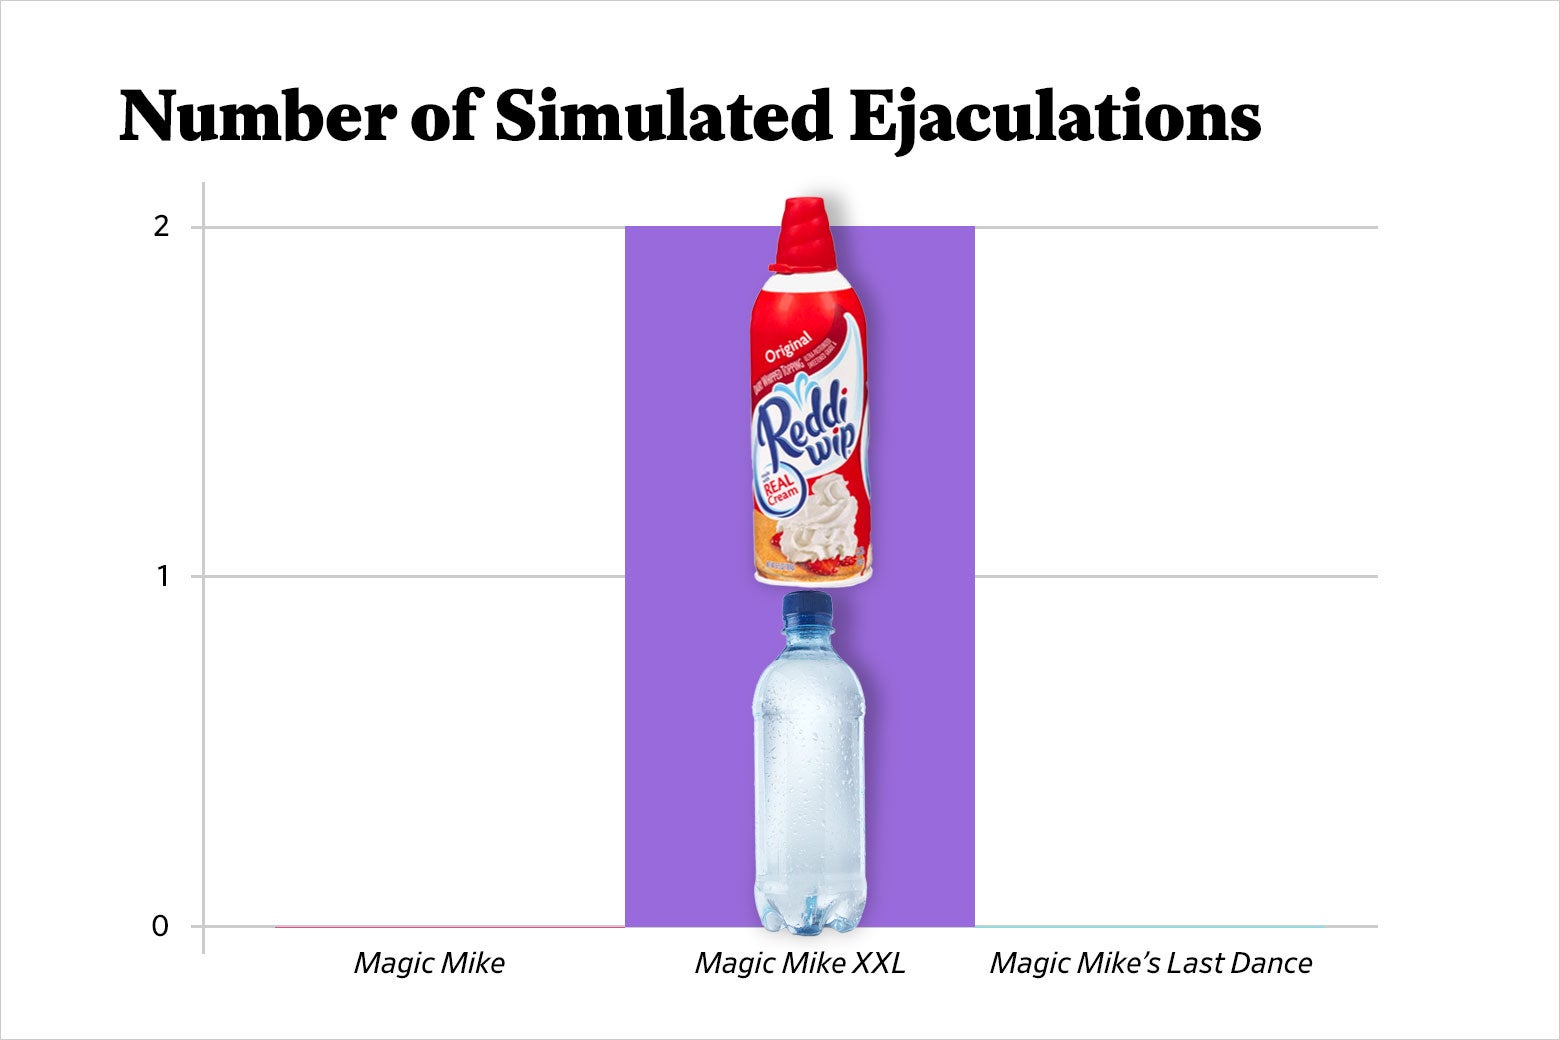 Another vertical bar chart with the heading: Number of Simulated Ejaculations, that only has one purple bar in the middle, signifying that the other two films scored zero. The first column, with no bar, sports a Magic Mike score of 0. The middle column, with the purple bar, indicates a Magic Mike XXL score of 2. The last column, with no bar, indicates a Magic Mike’s Last Dance score of 0. Laid on top of the middle purple bar is an image of a Reddi-Whip can stacked on top of a water bottle.